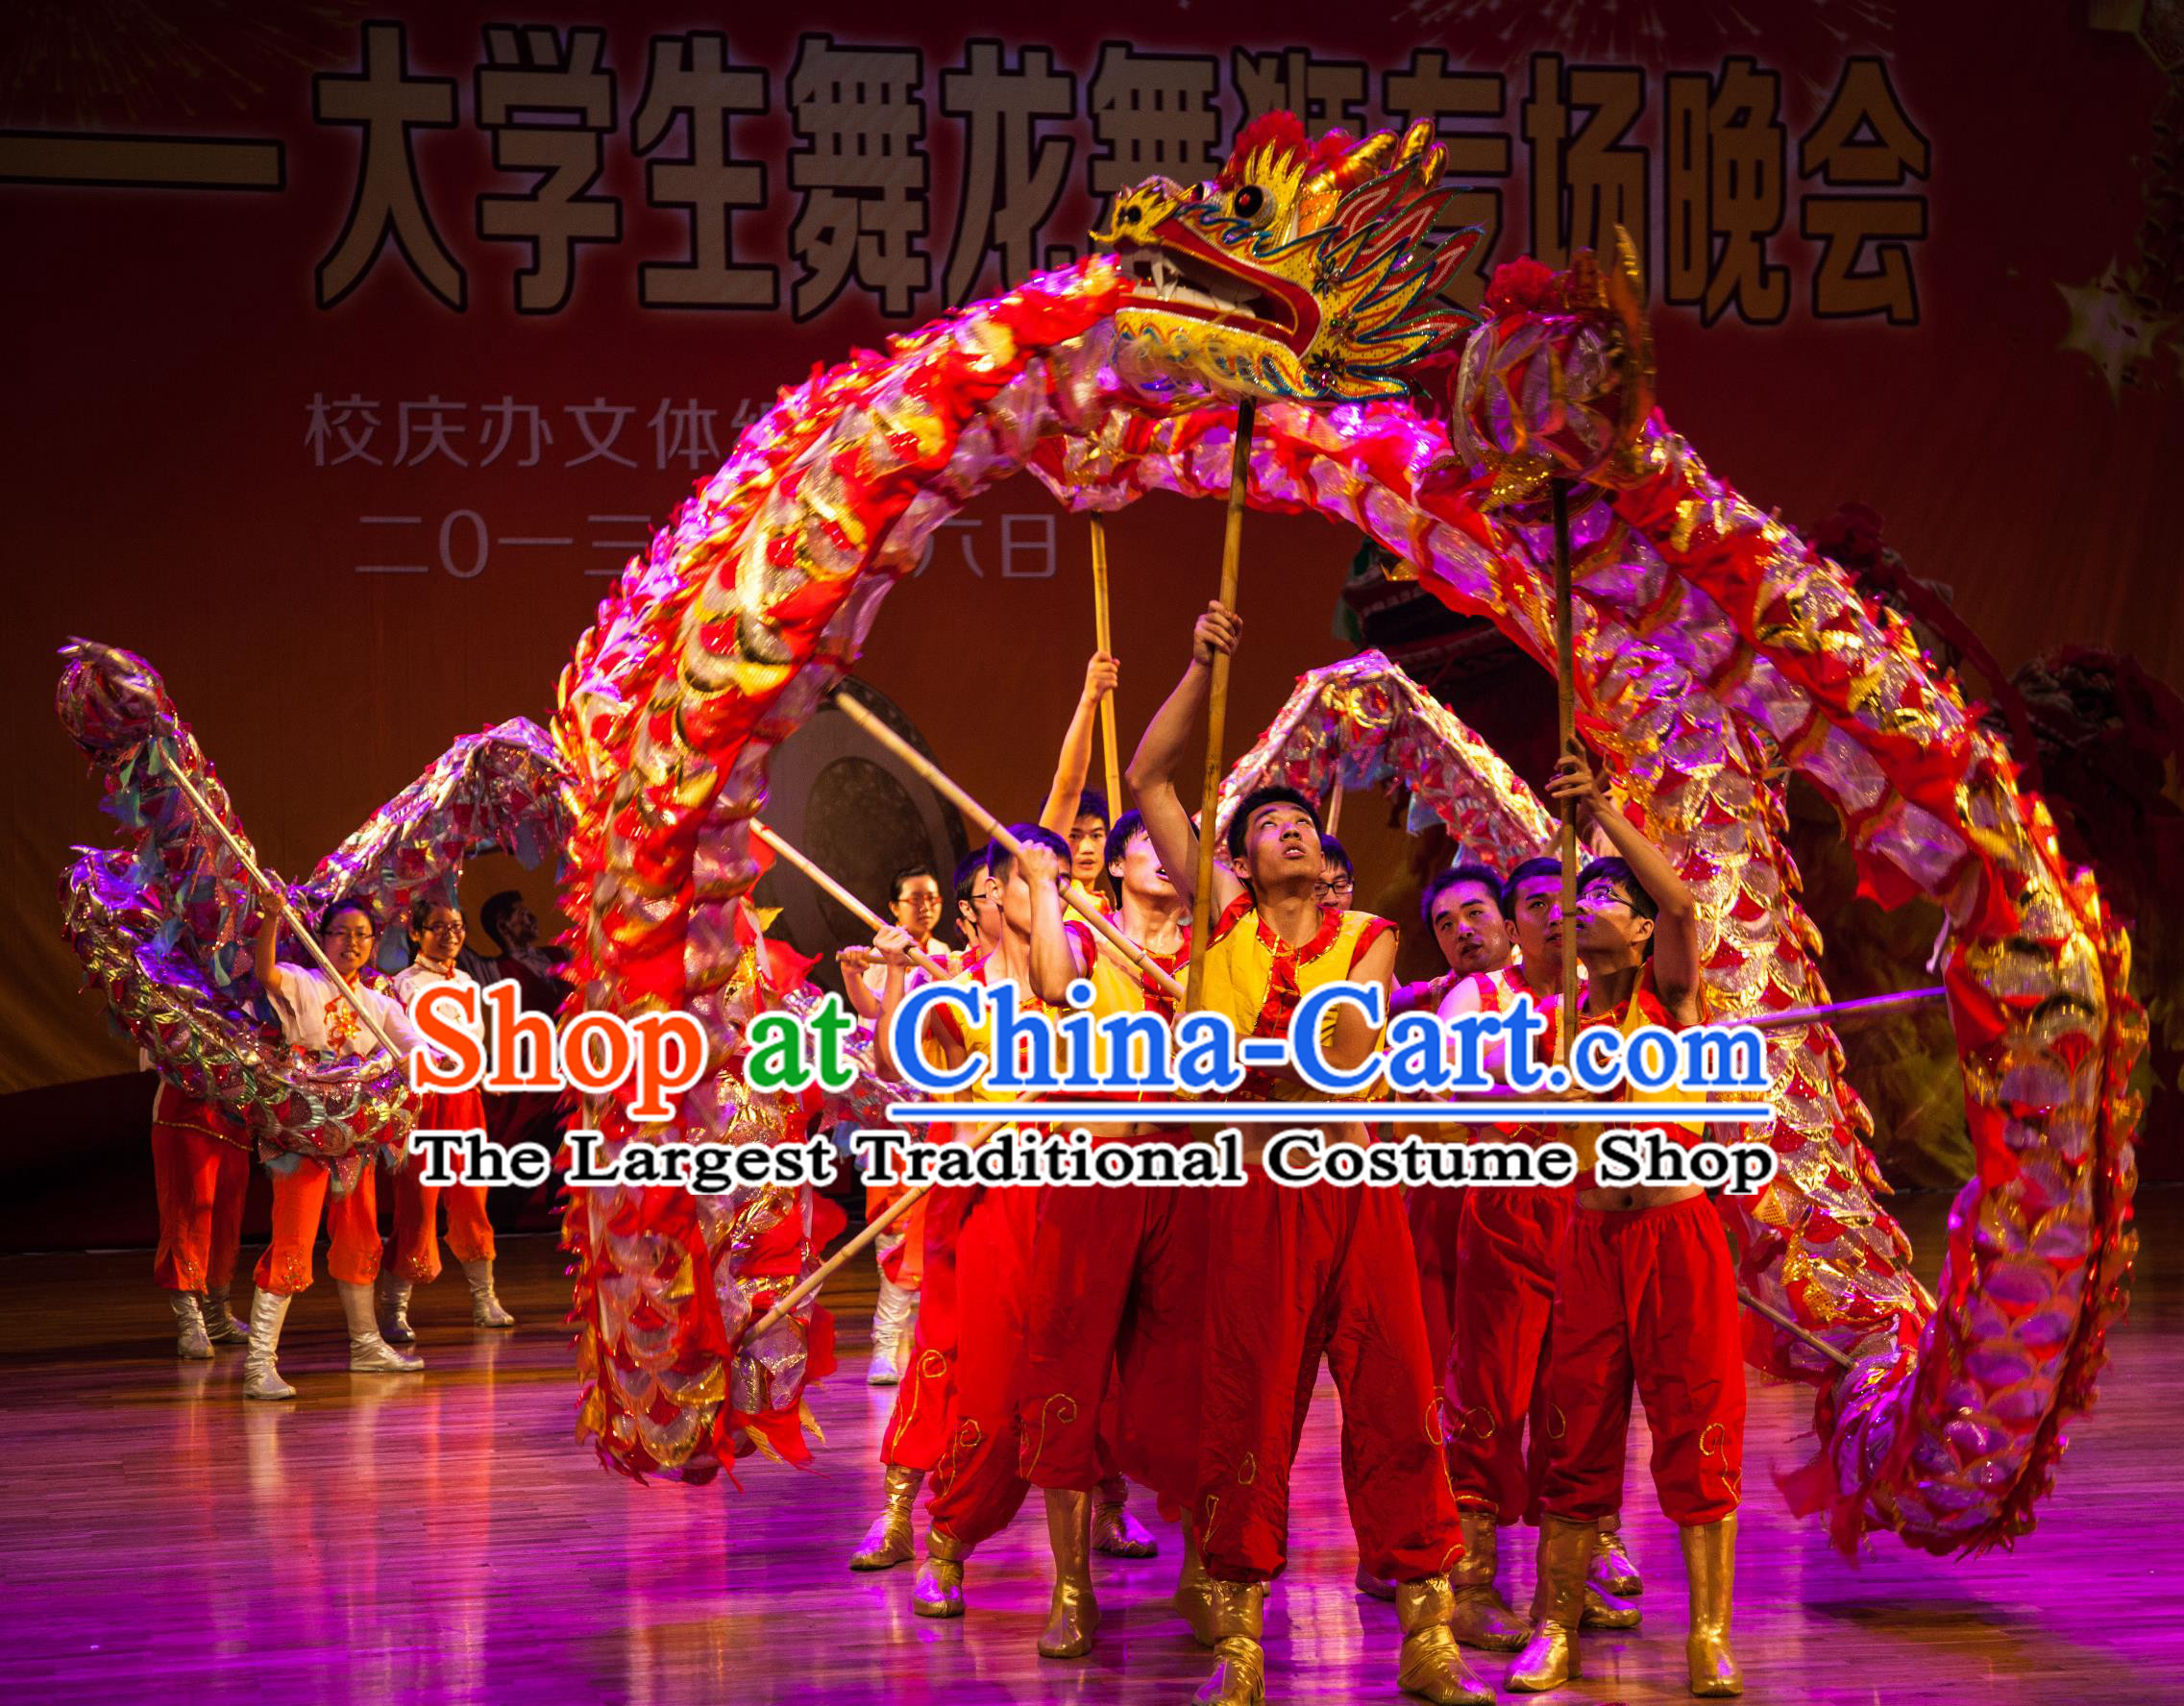 Chinese Dragon Dance Fluorescent Costume Celebration Parade Red Dragon Professional Competition Dragon Dancing Prop